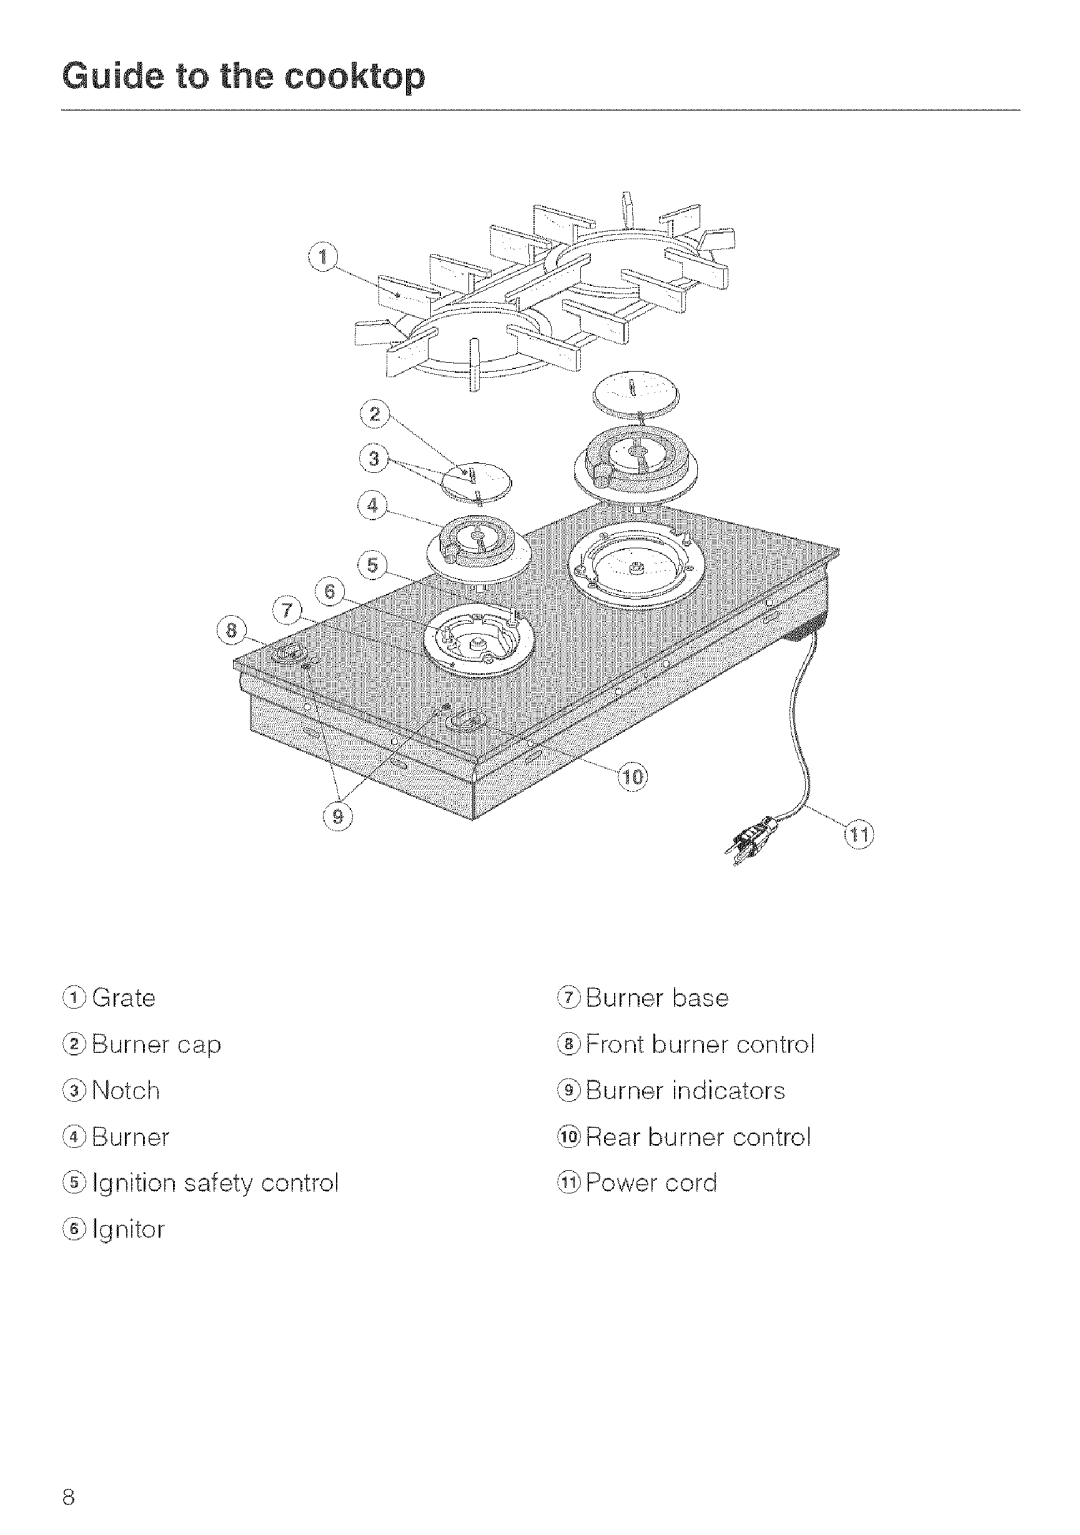 Miele KM 404 manual Guide to the cooktop 